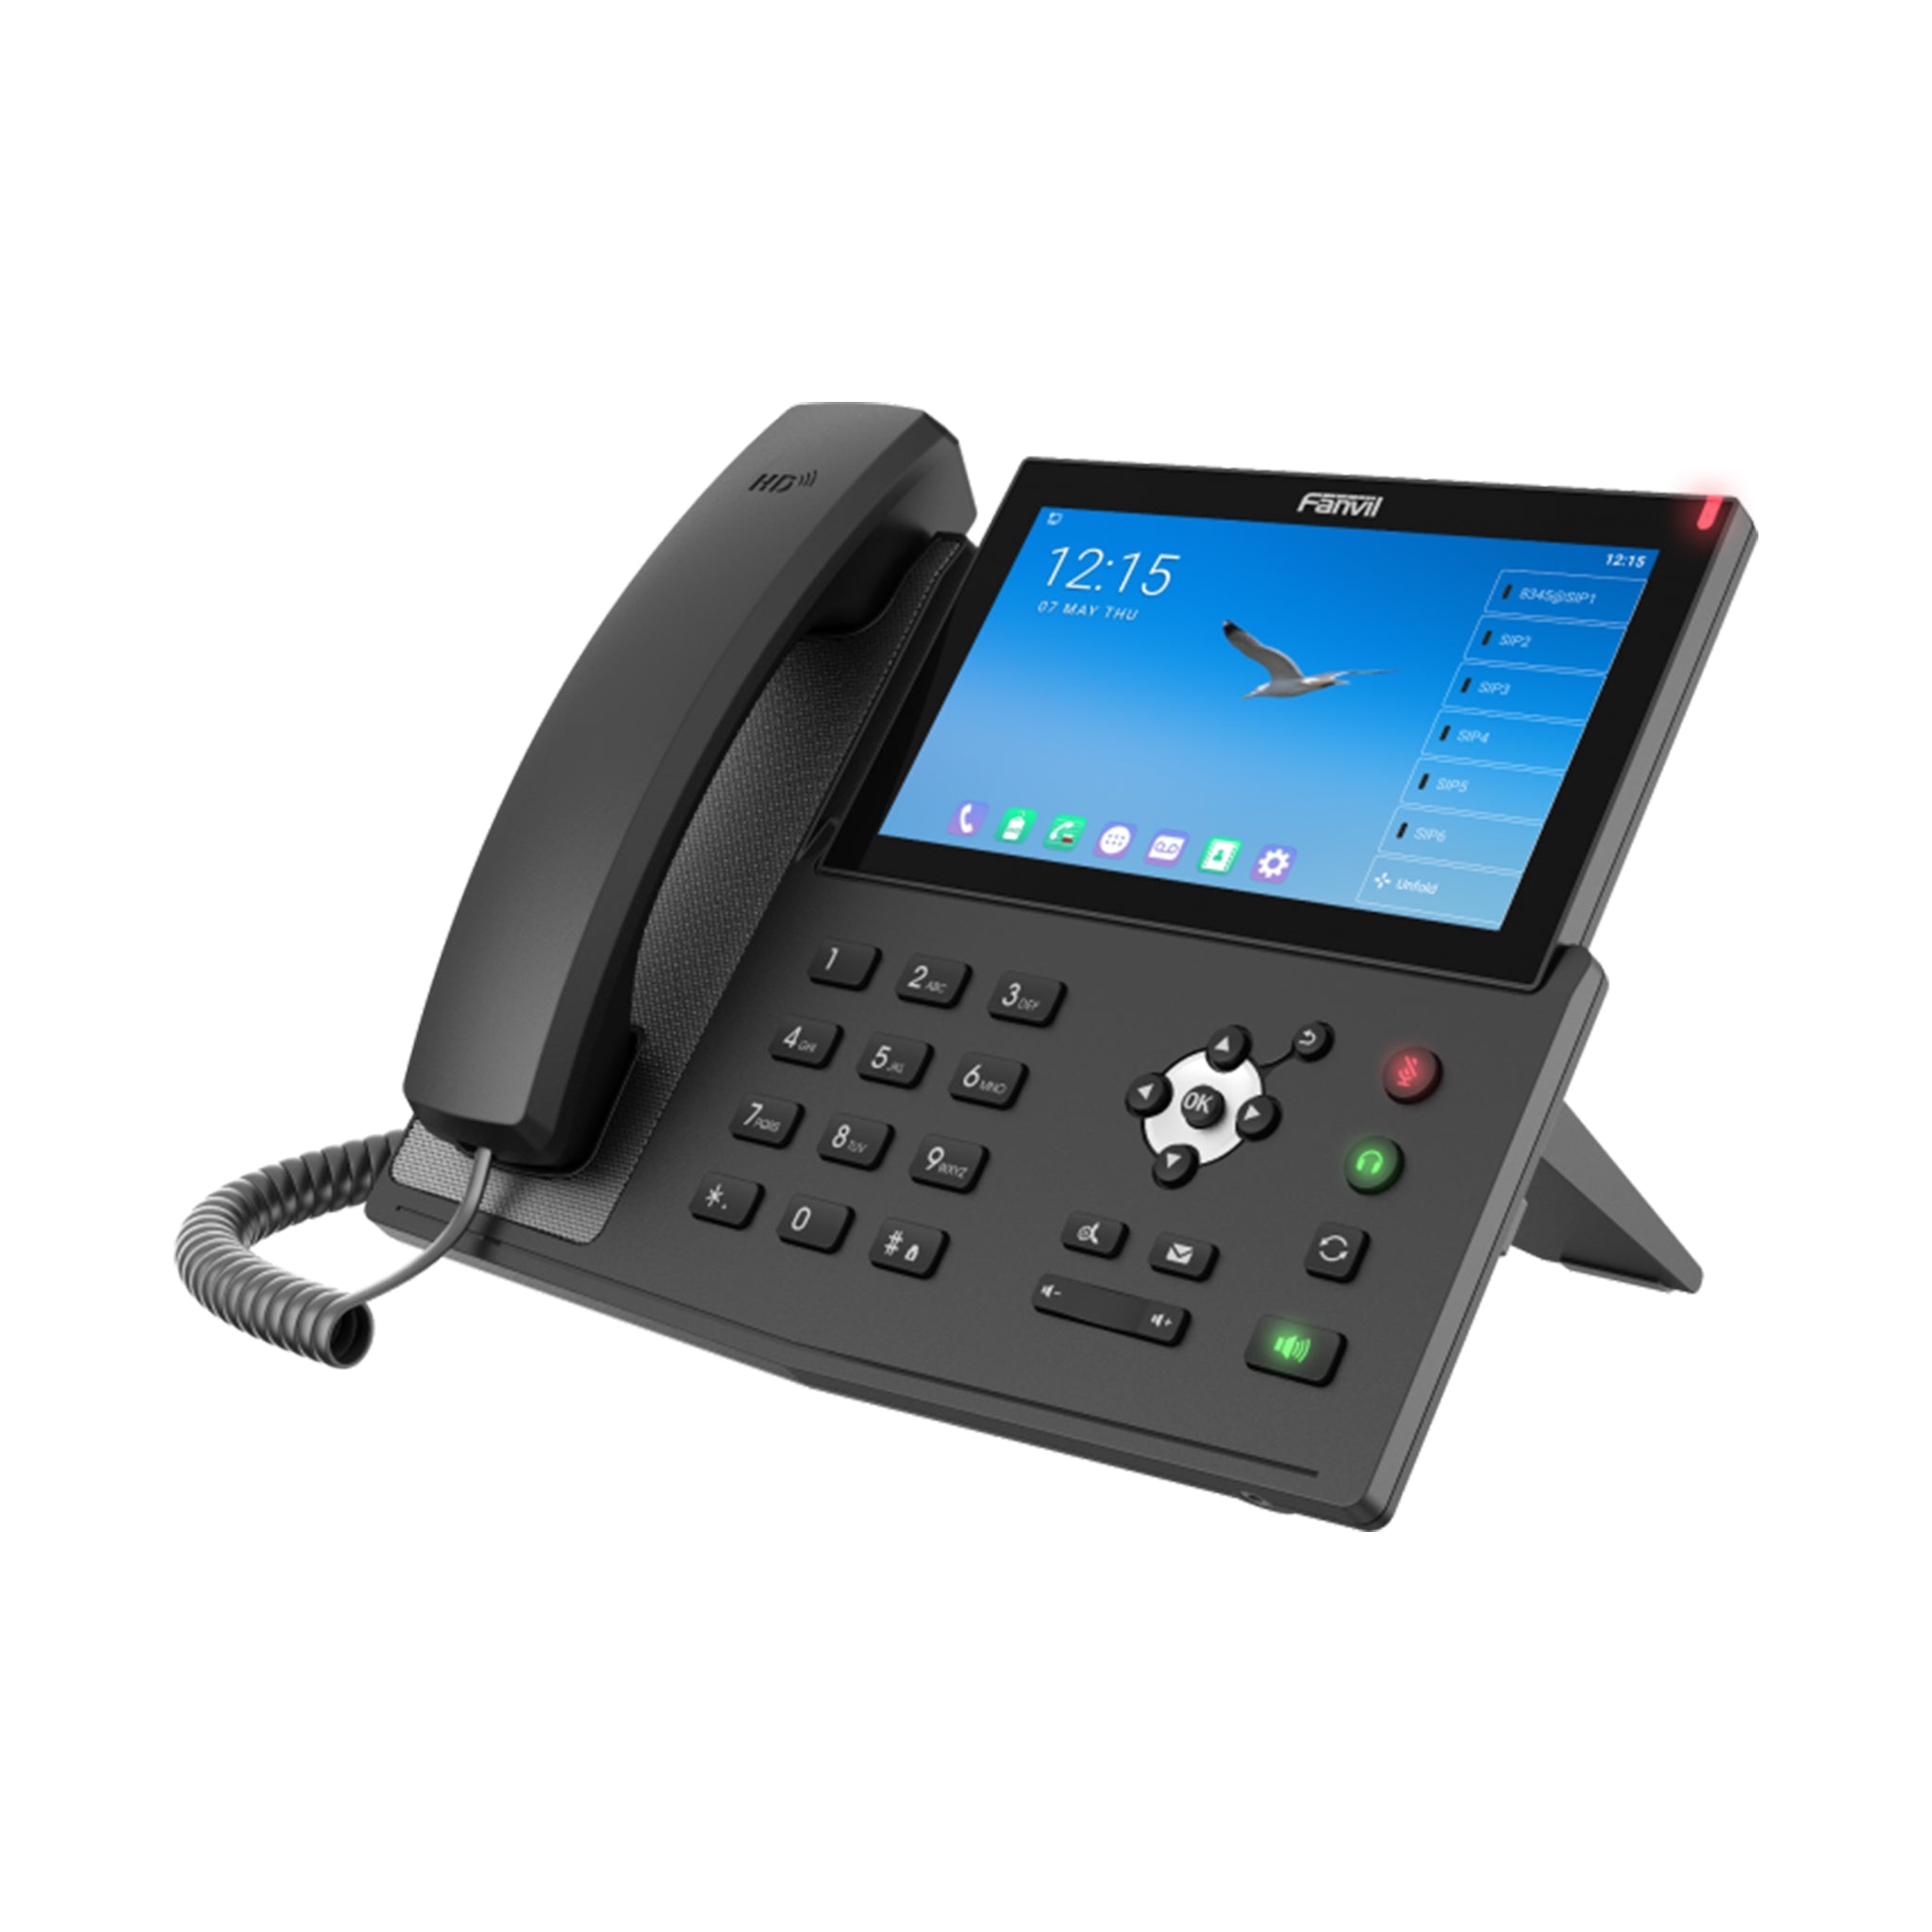 Fanvil X7A - High-end IP phone X7A Android, Touch-Screen | AL-VoIP Store